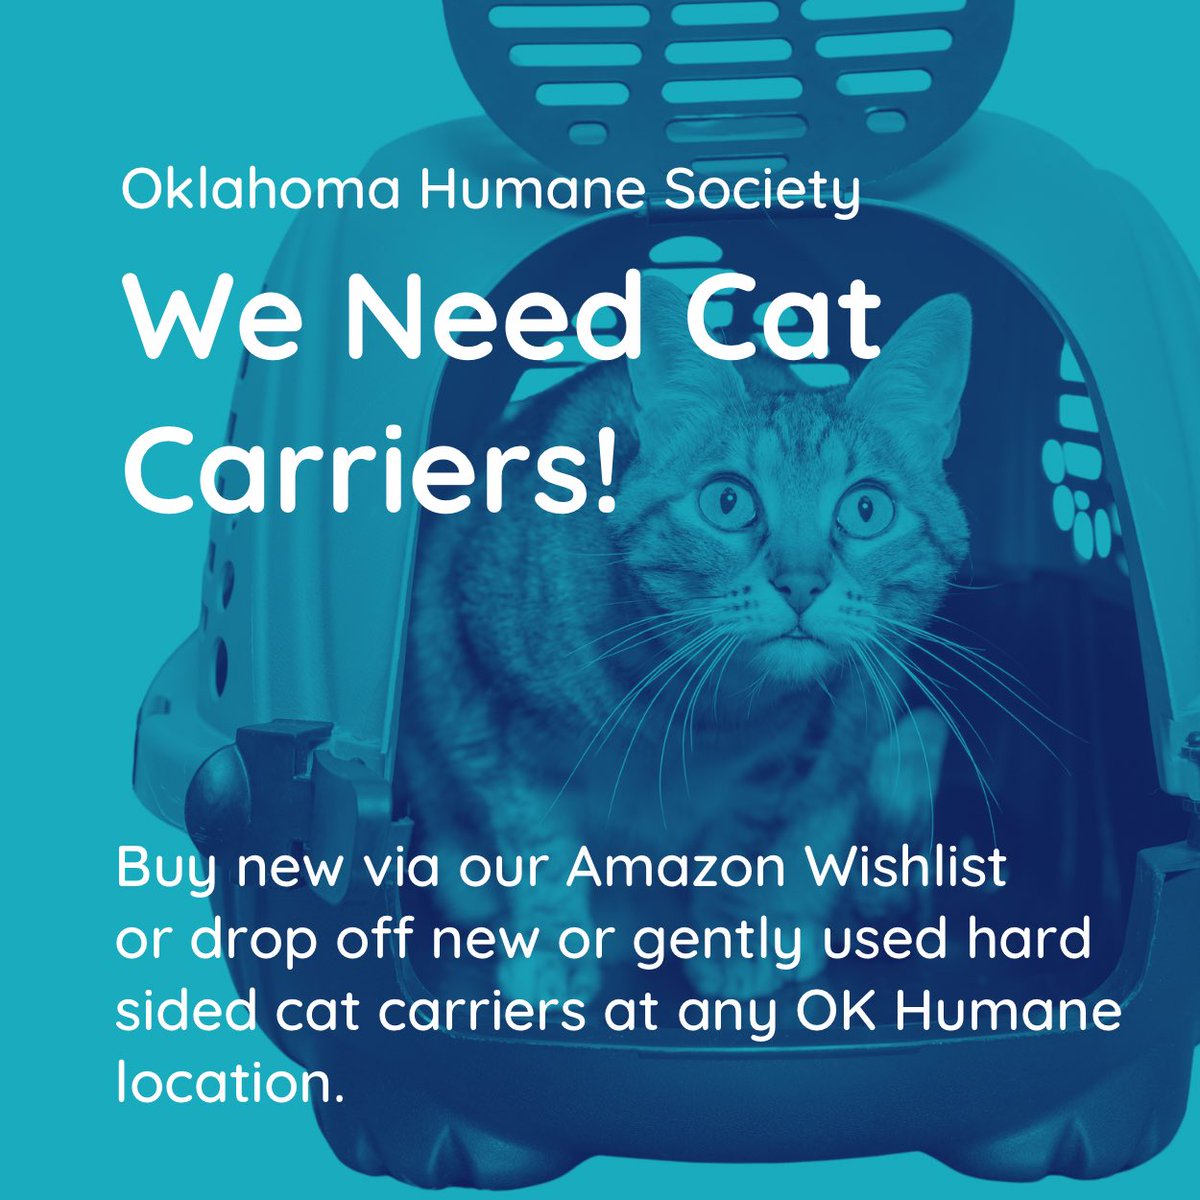 We need hard sided cat carriers! You can help by ordering hard sided cat carriers off our Amazon Wishlist or by dropping off new or gently used hard sided cat carriers at any OK Humane location! Thank you for the support! Amazon Wishlist: amzn.to/3PA7lXI